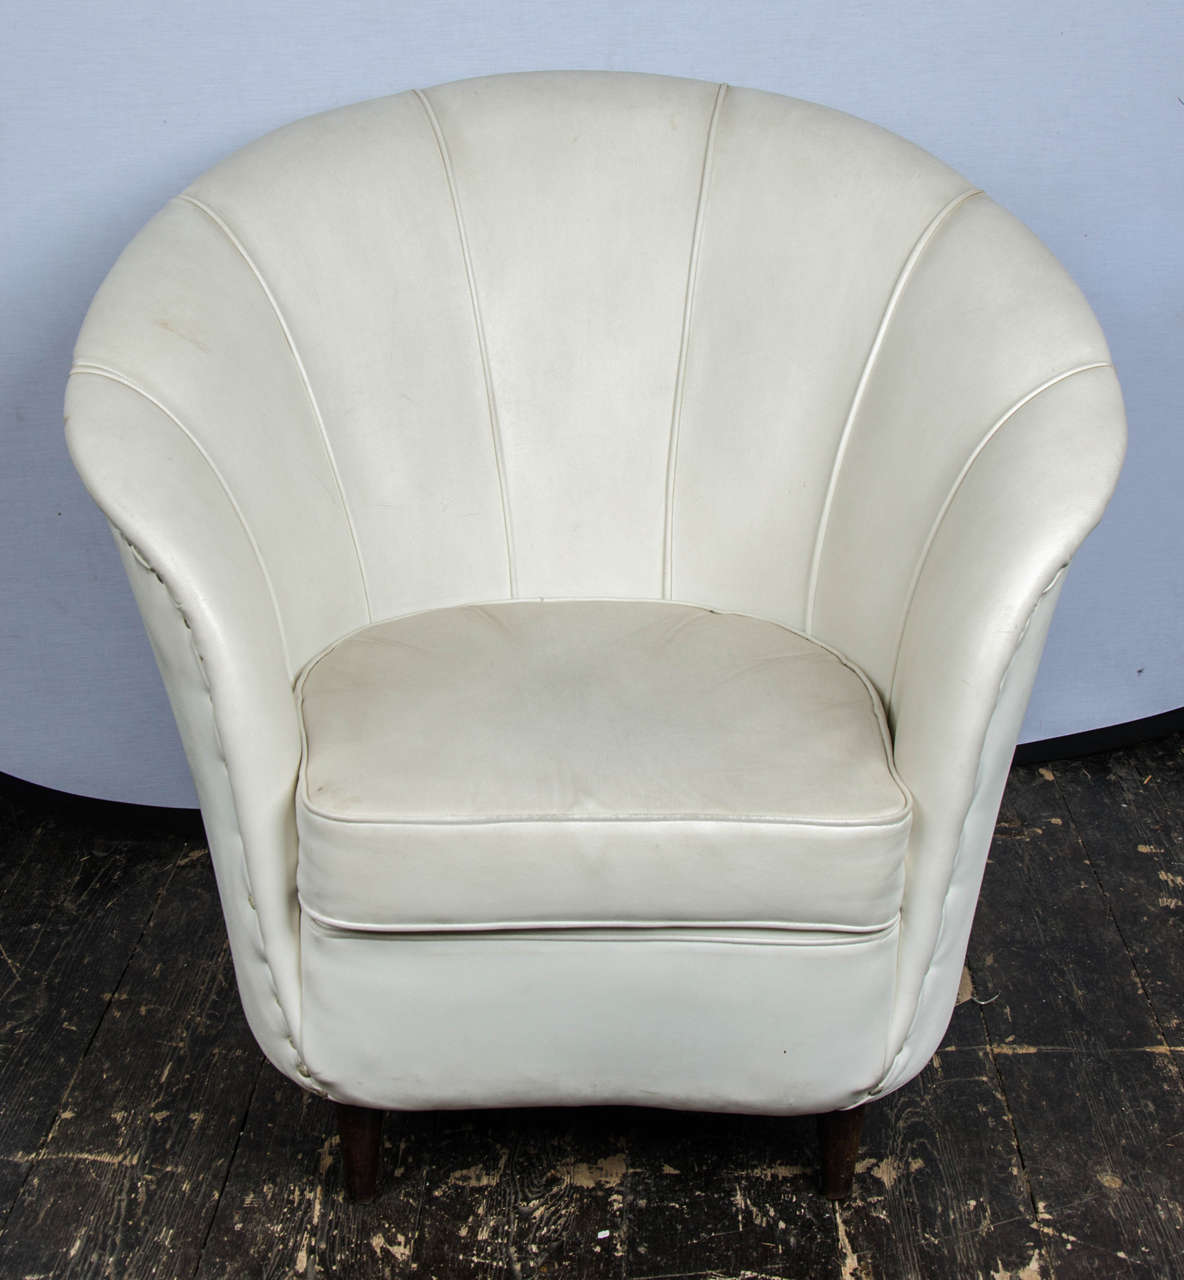 A pair of Italian armchairs in original white leather.